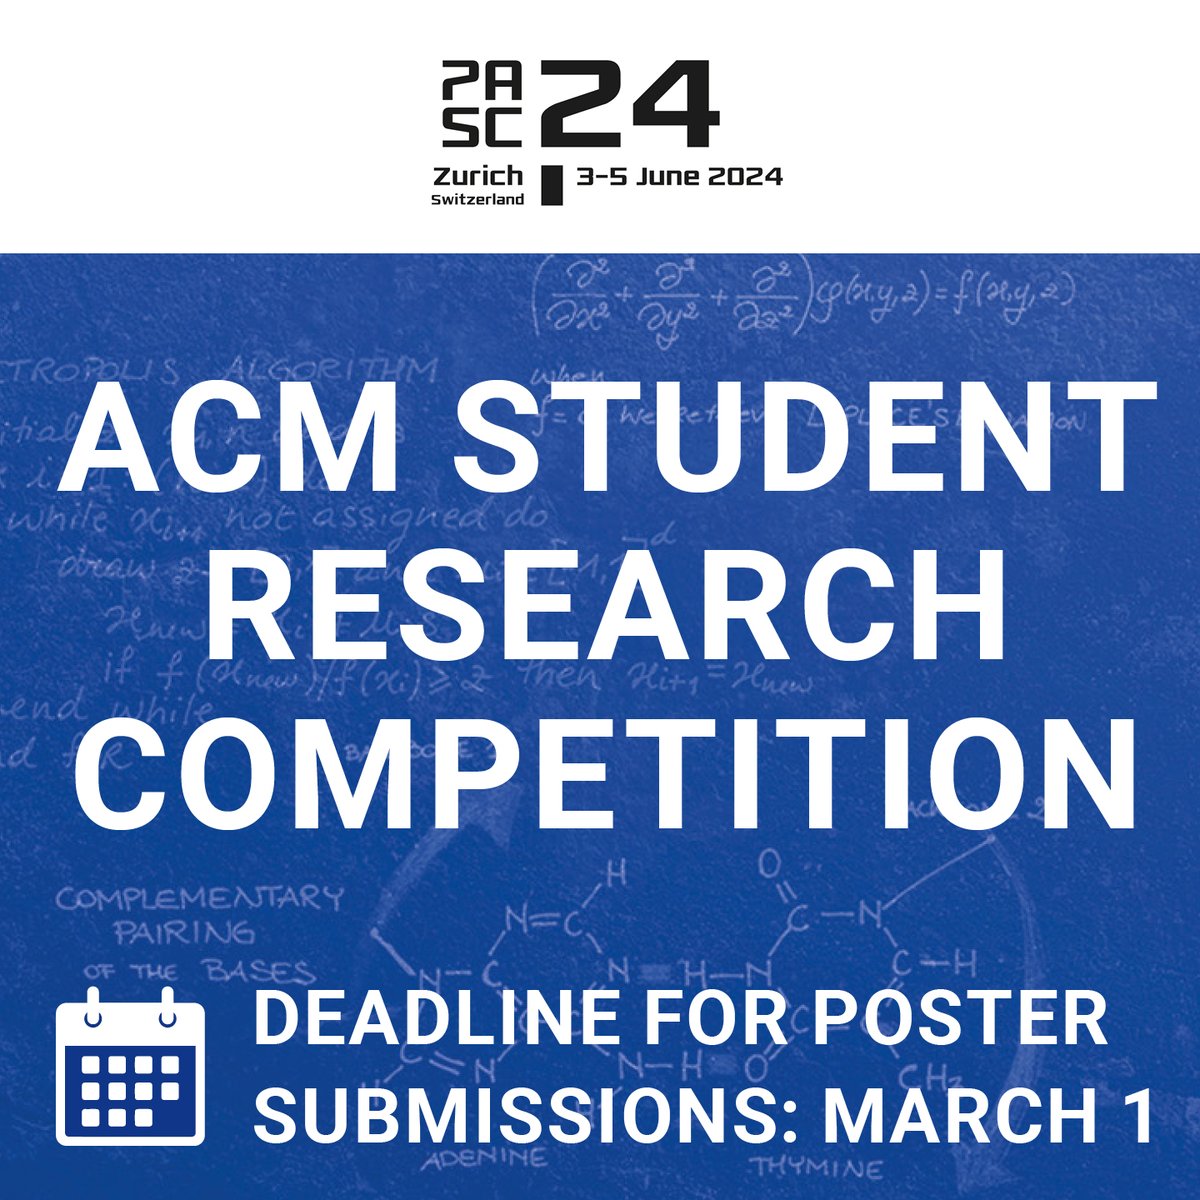 We are pleased to announce that this year, for the first time, we are hosting a Student Research Competition sponsored by ACM with some travel financial support generously offered by SIGHPC. Read more here 👉 pasc24.pasc-conference.org/submission/gui… #PASC24 #acm #sighpc